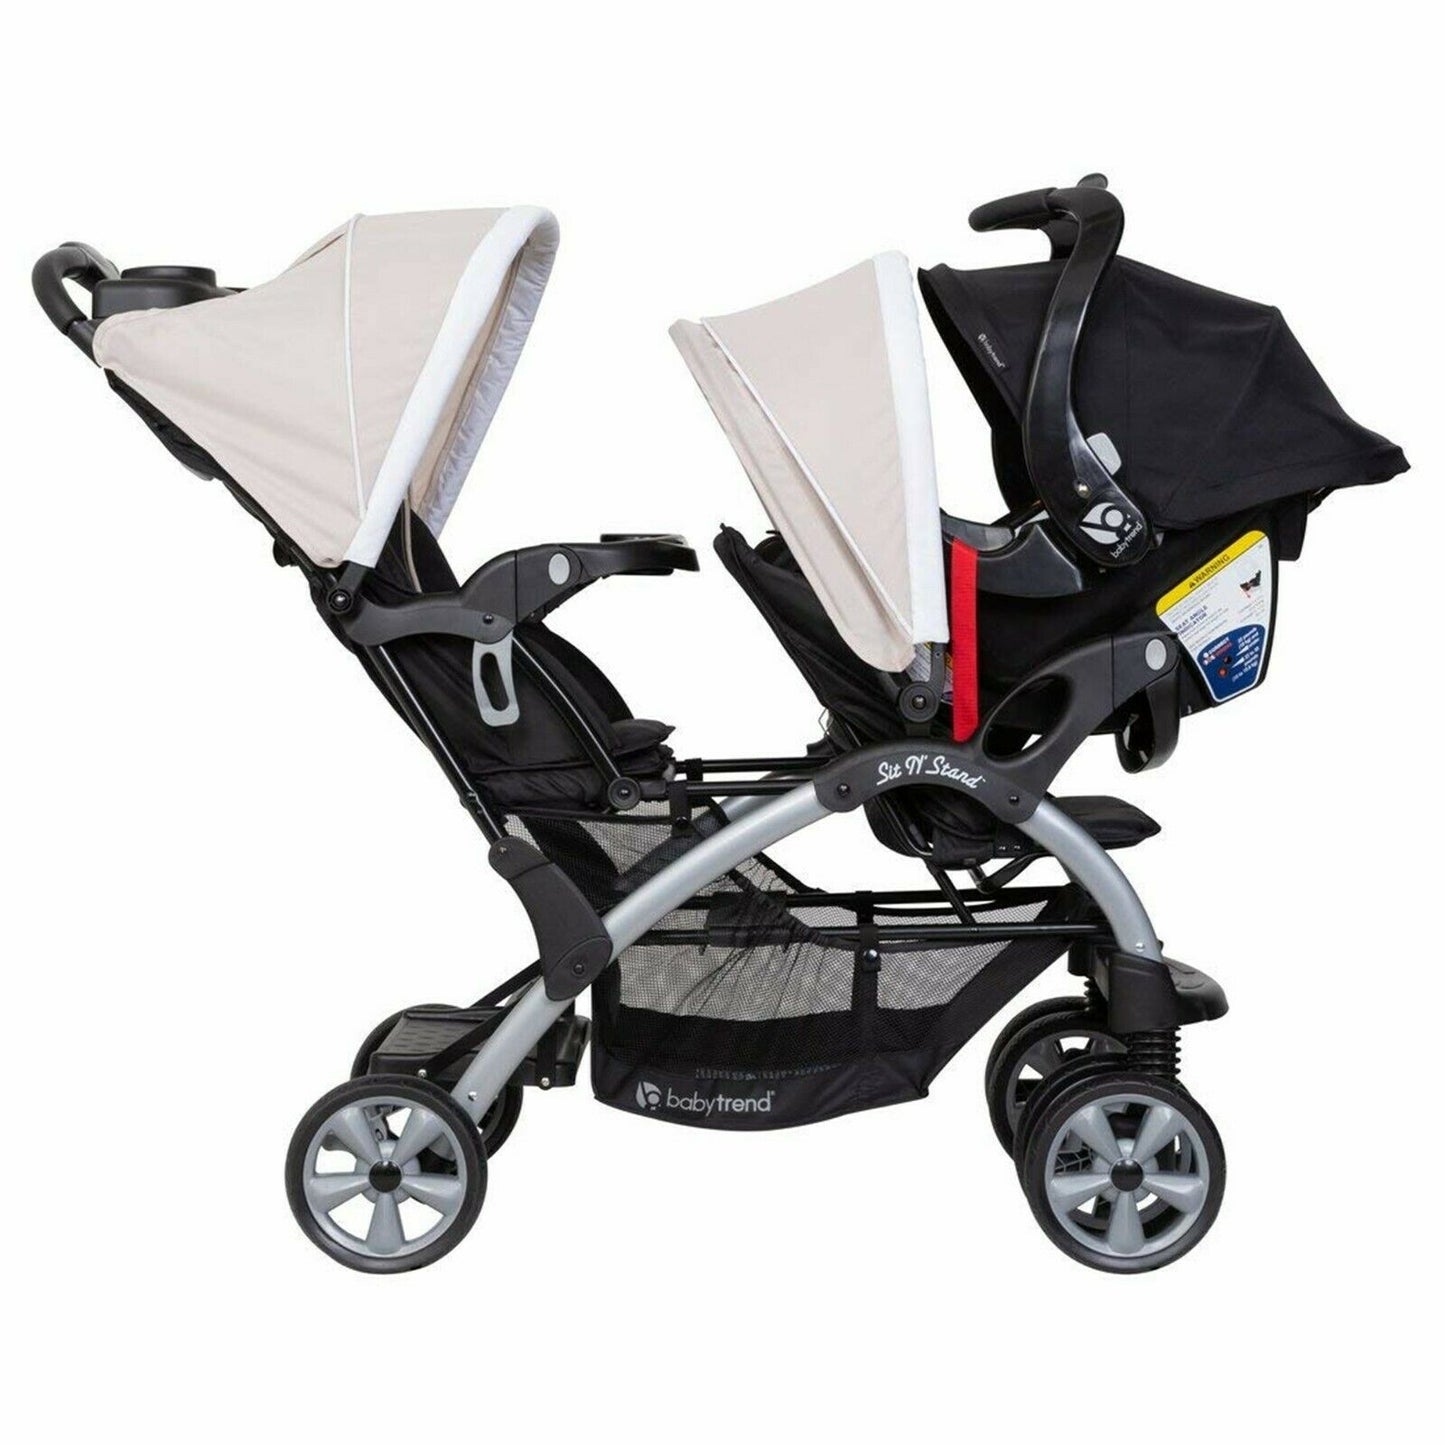 Double Baby Trend Stroller with 2 Car Seat Twin Playard Crib Travel System Combo